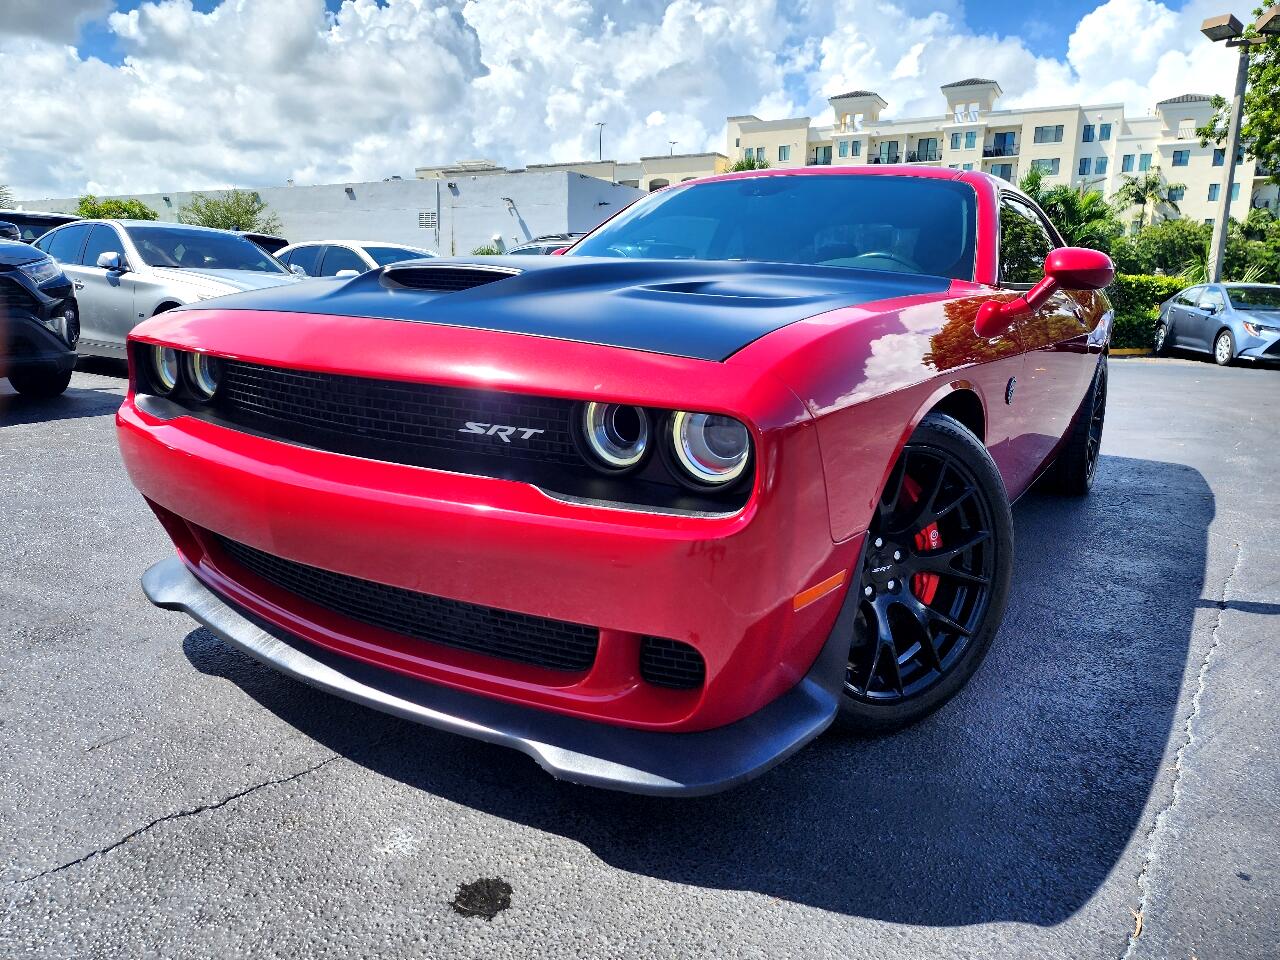 2016 DODGE Challenger Coupe - $52,495